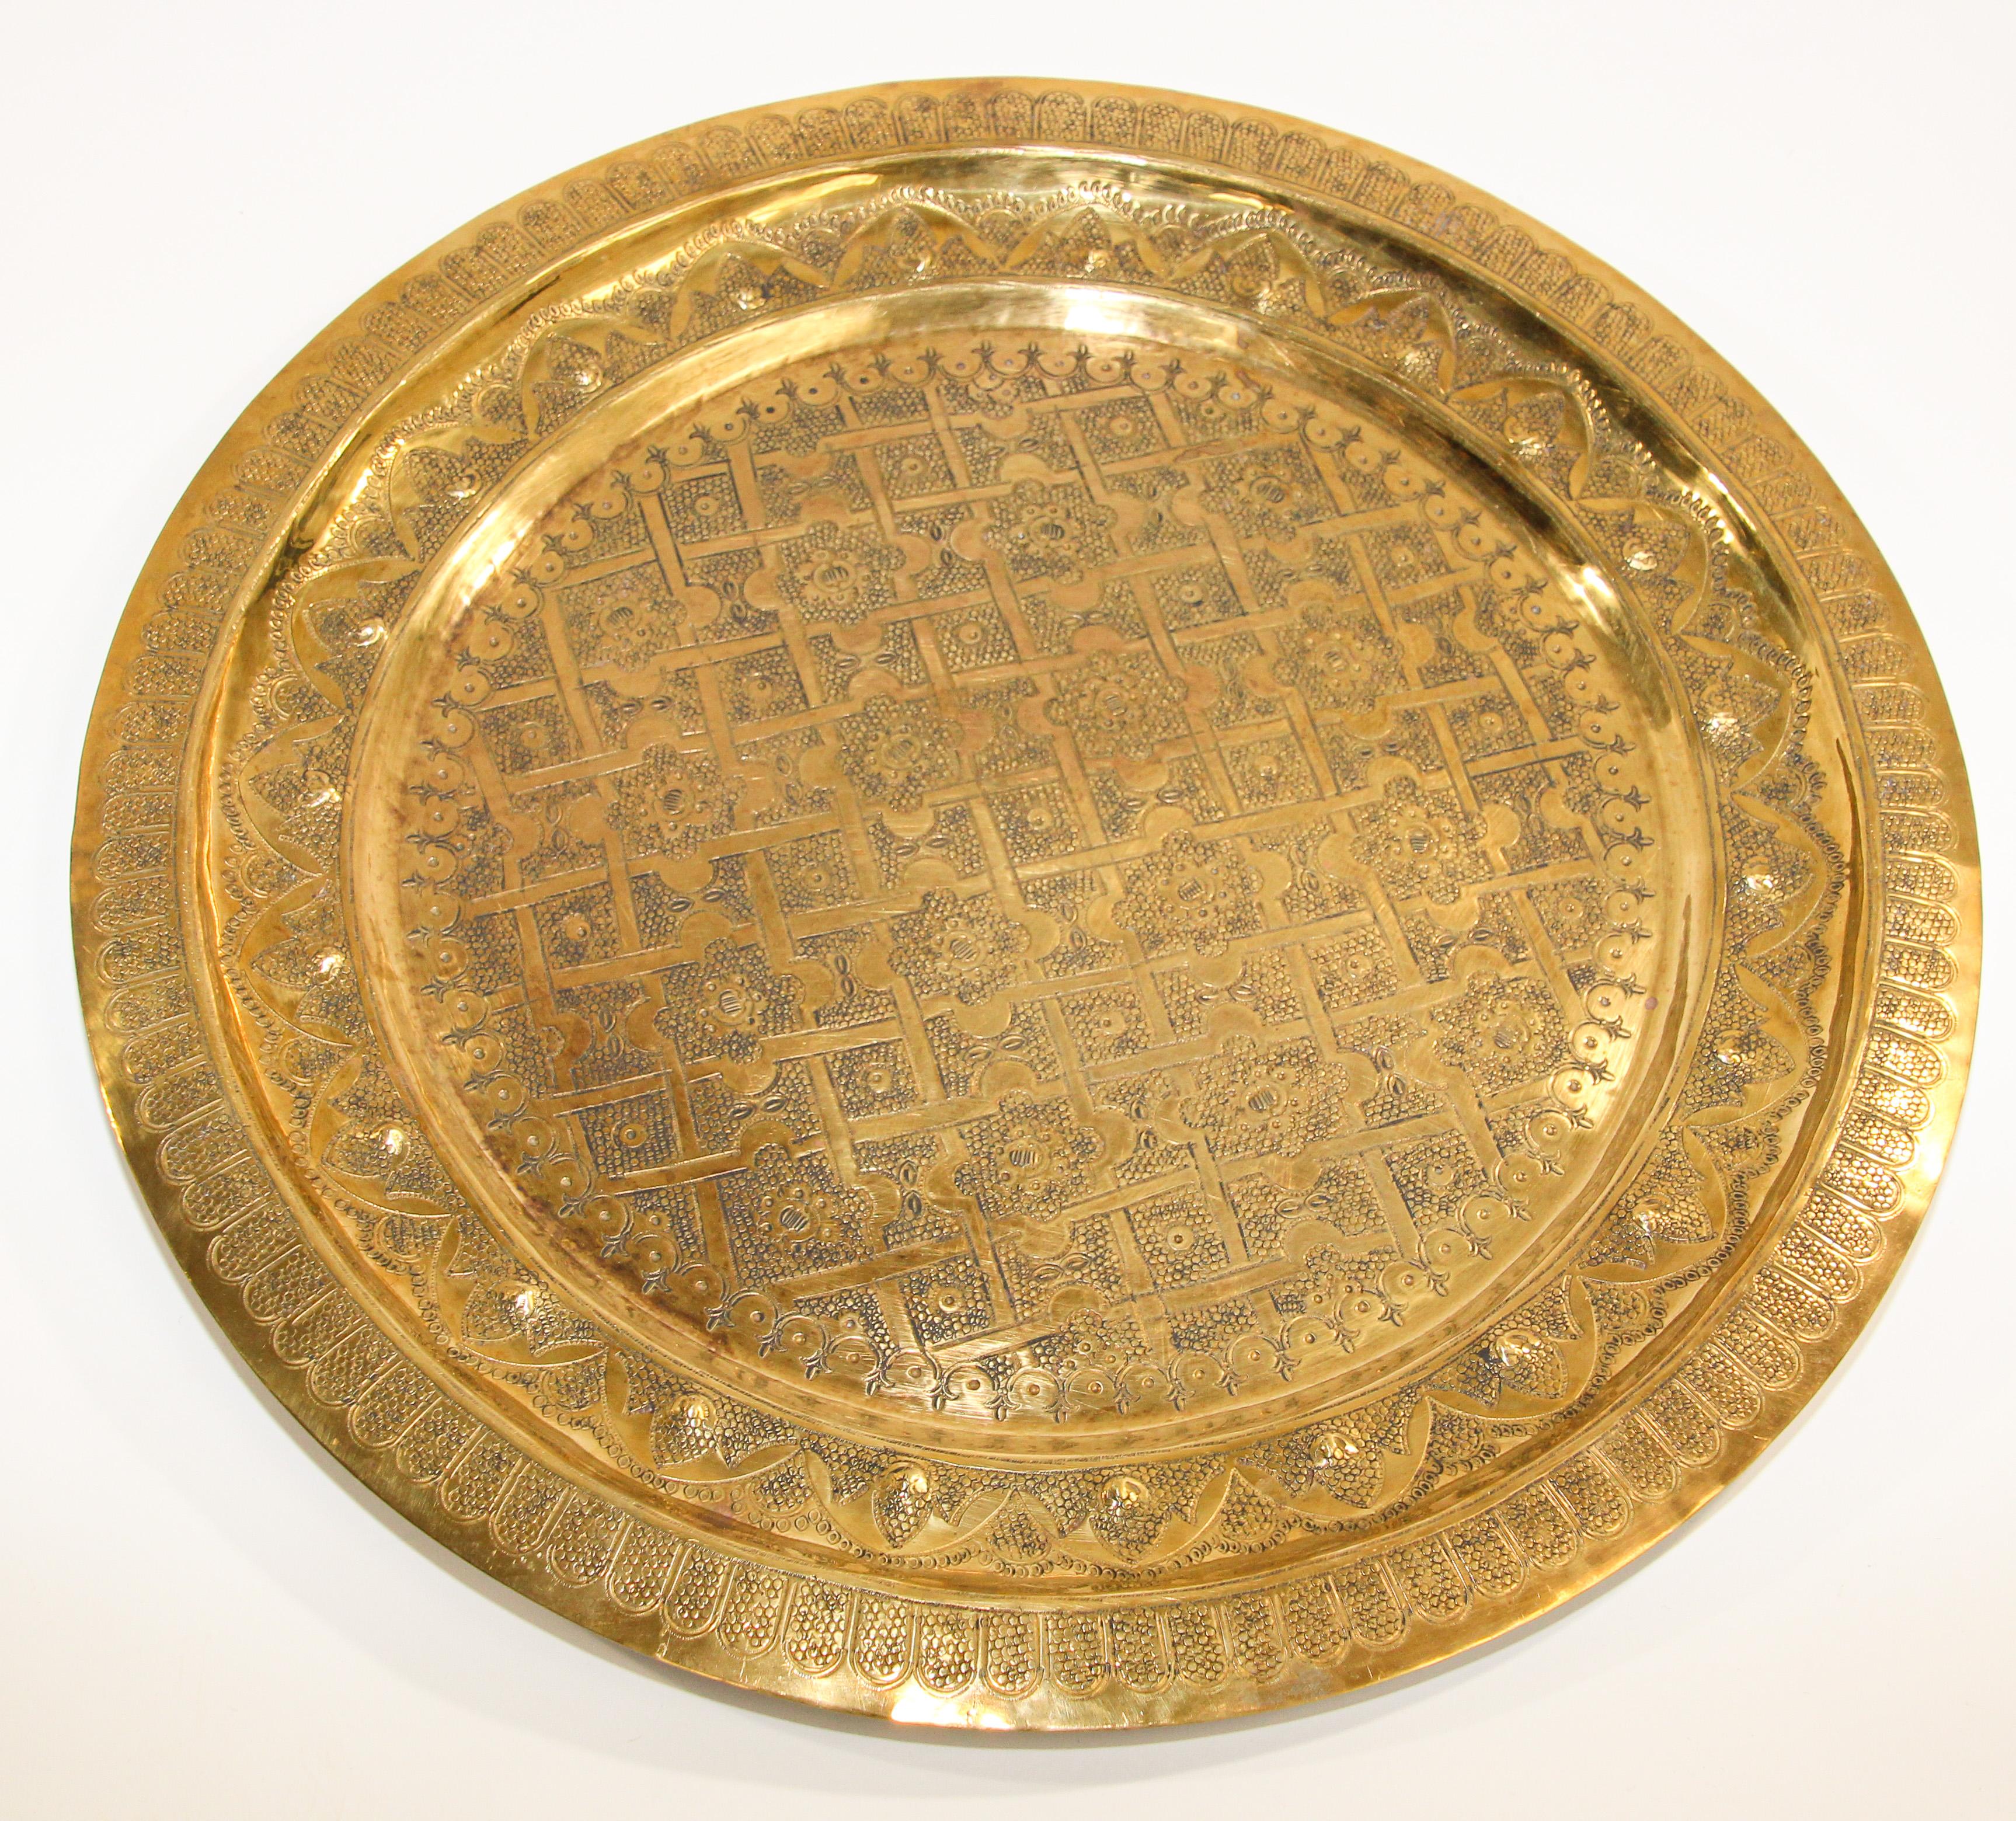 Fabulous Moroccan Moorish hand-hammered brass tray, intricate multi dimension artwork, very fine Islamic Metalwork brass repousse geometrical designs.
Handcrafted decorative brass tray, could be used also as a serving platter, or an ottoman, or as